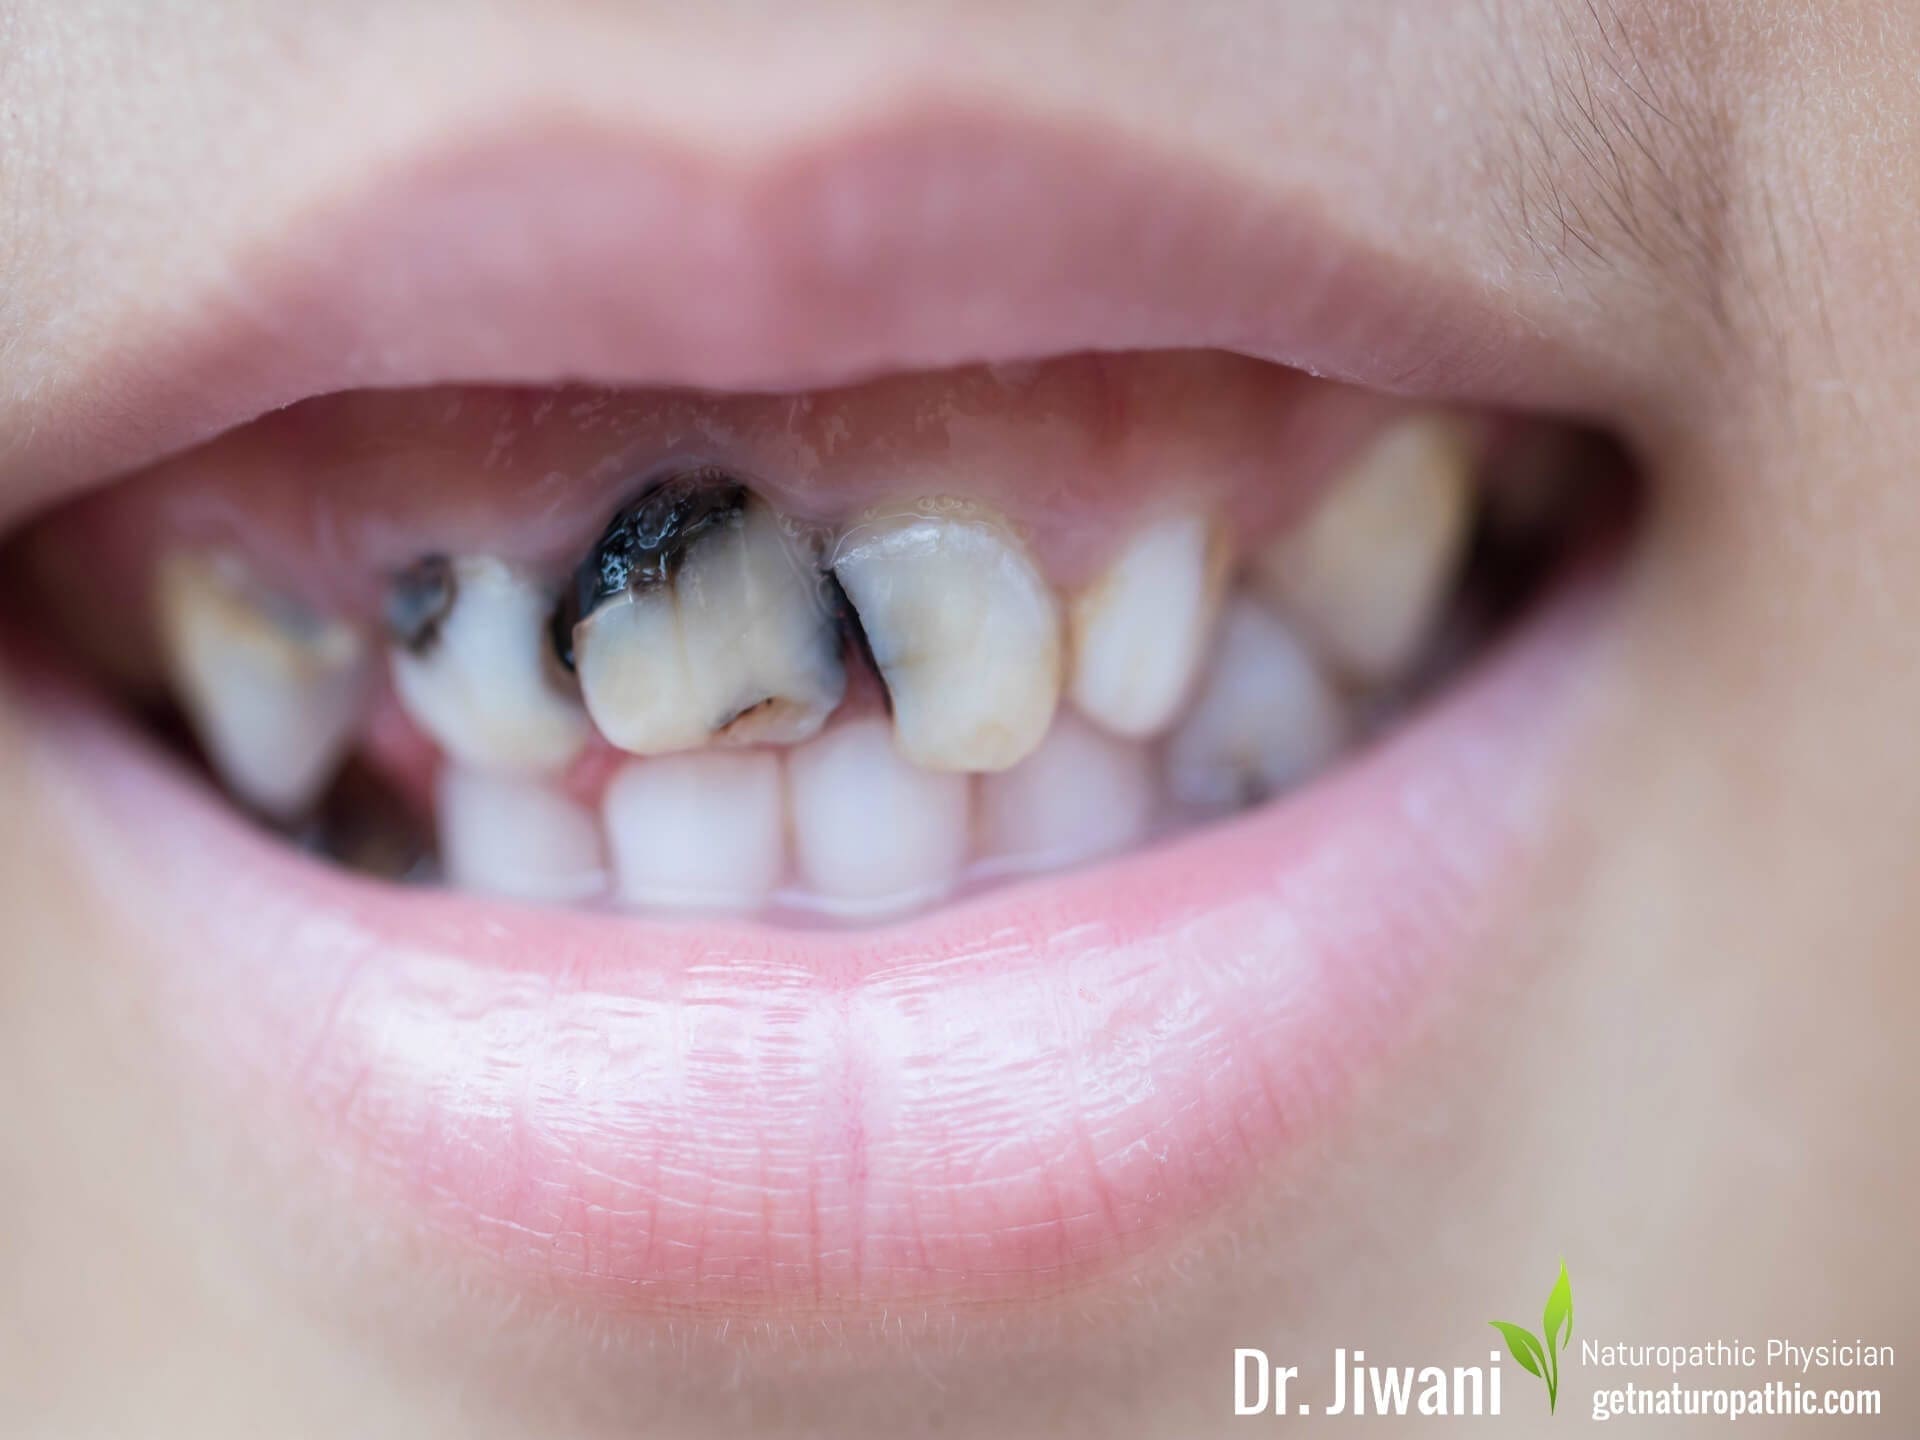 DrJiwani Tooth Decay Sugar the Sweet Poison The Alarming Ways Sugar Damages Your Body & Brain* | Dr. Jiwani's Naturopathic Nuggets Blog